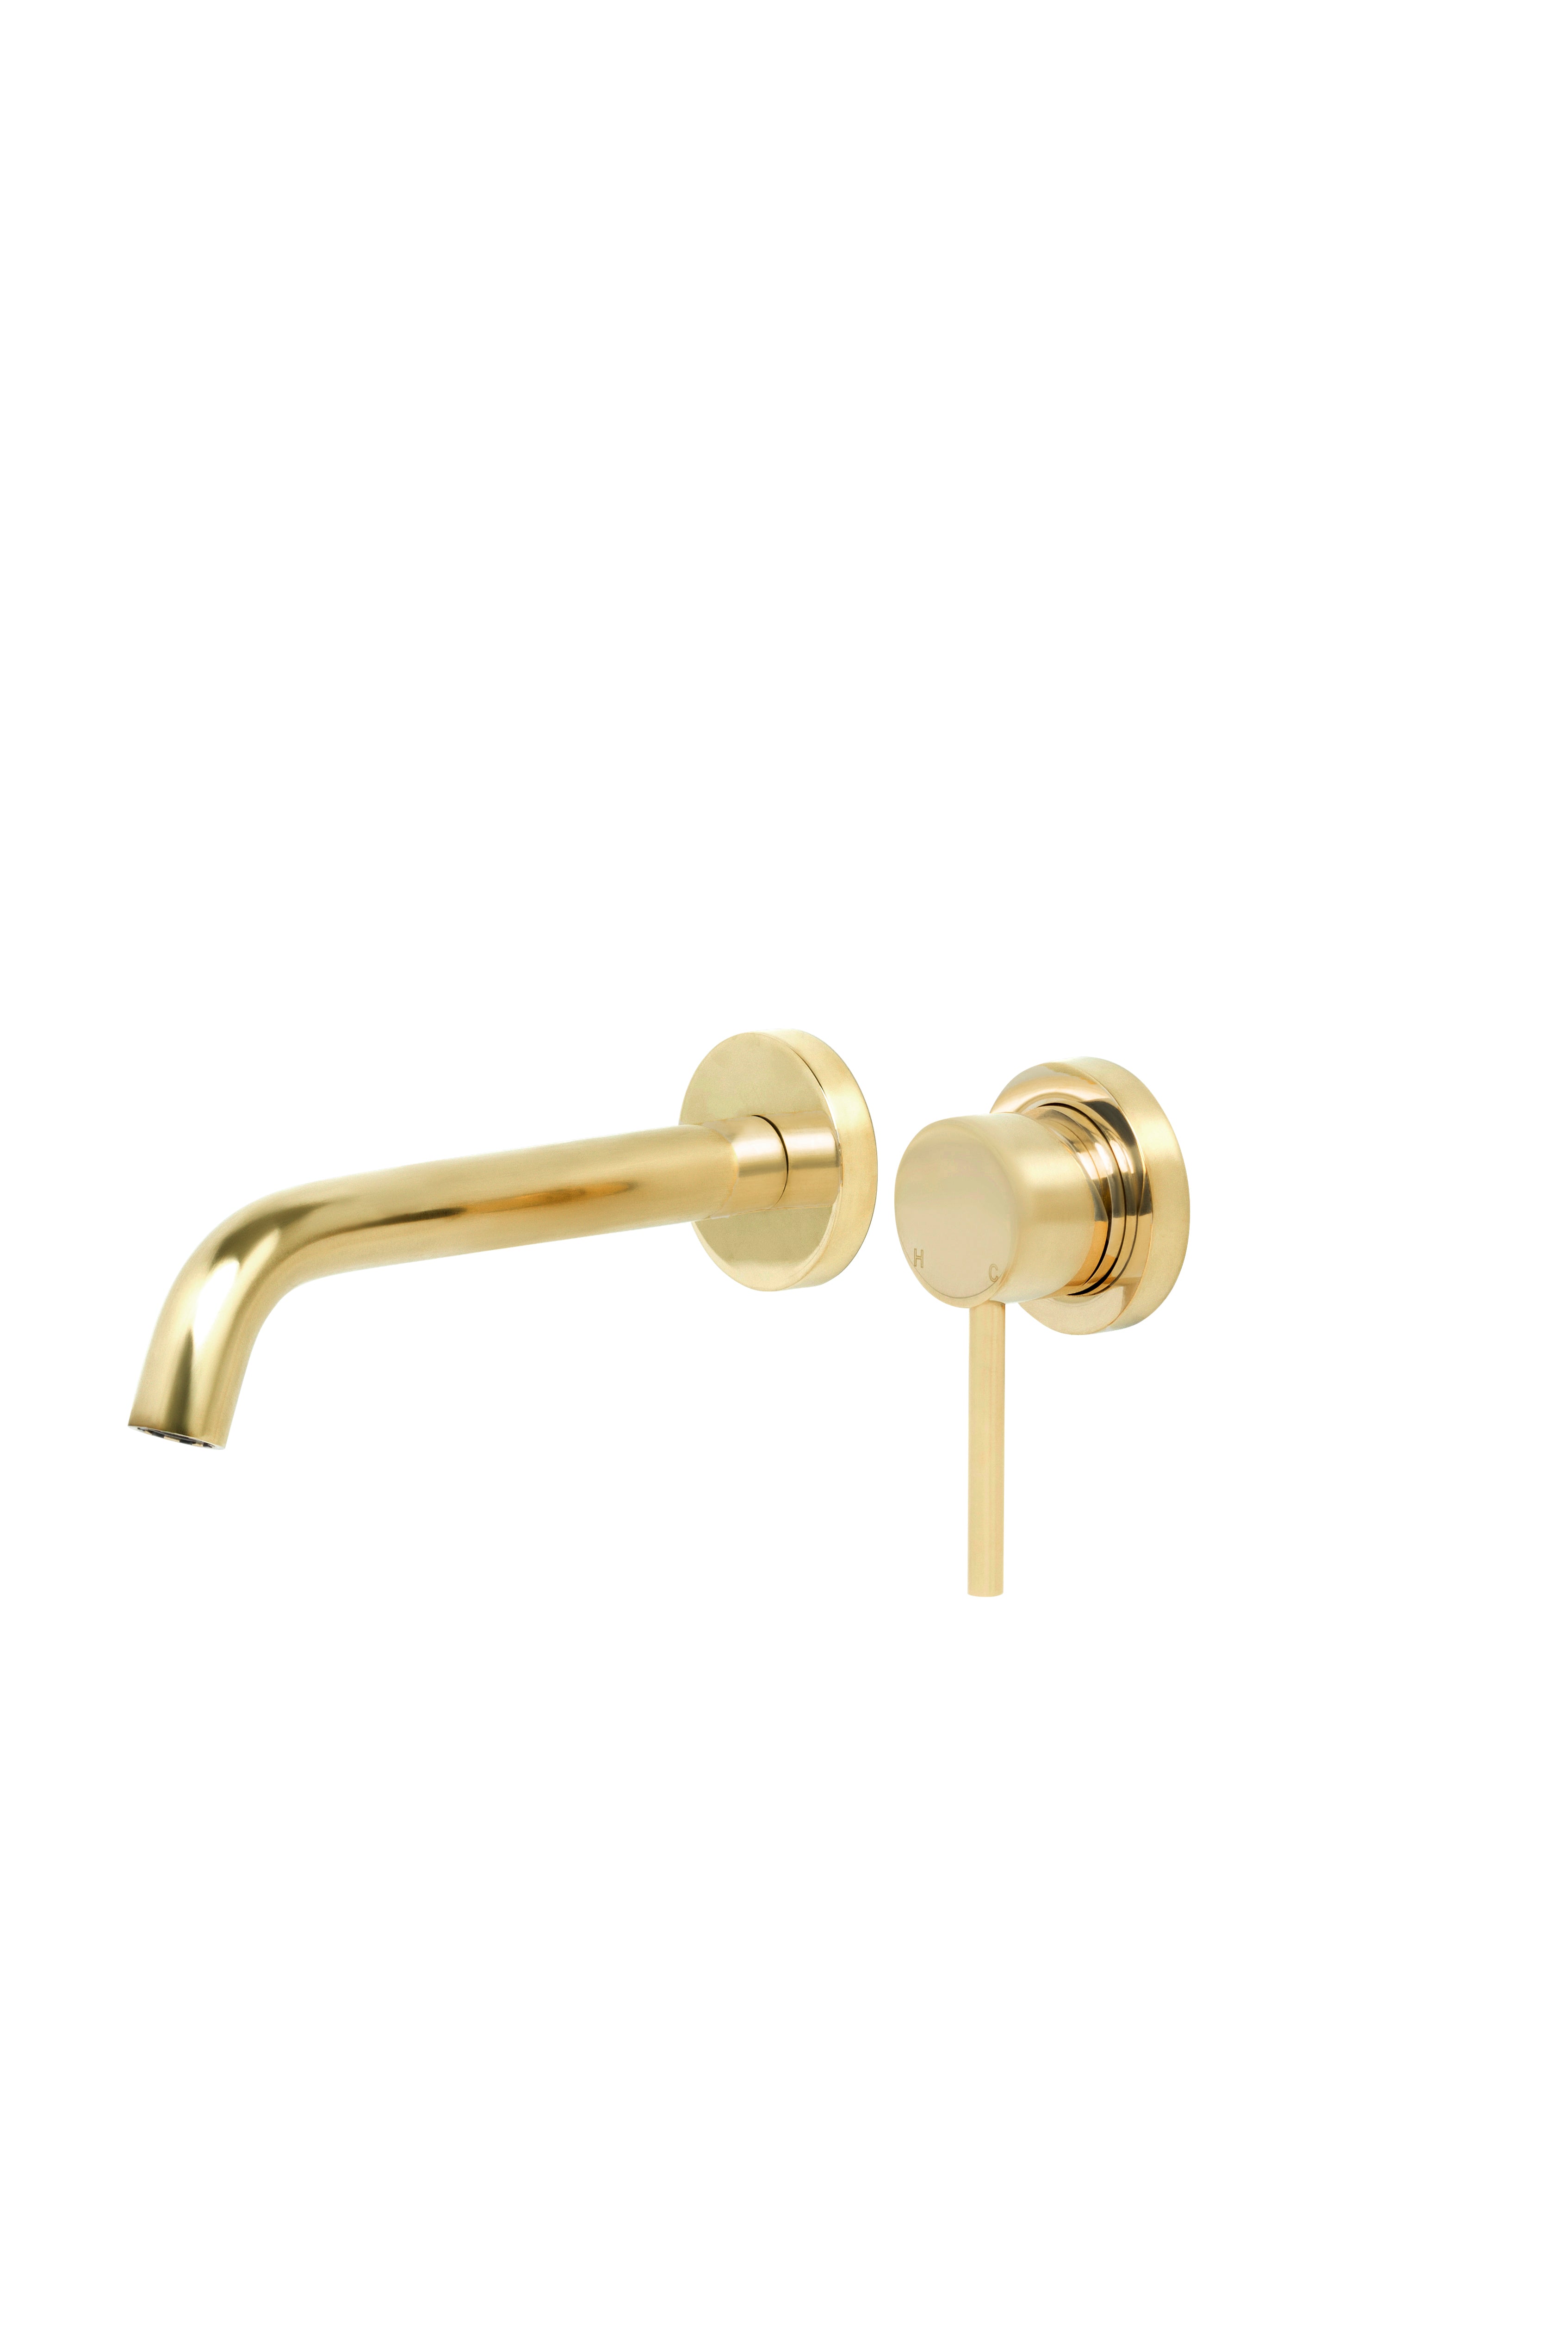 Bondi Pin Lever Wall Mixer Set with Curved Spout in Raw Brass